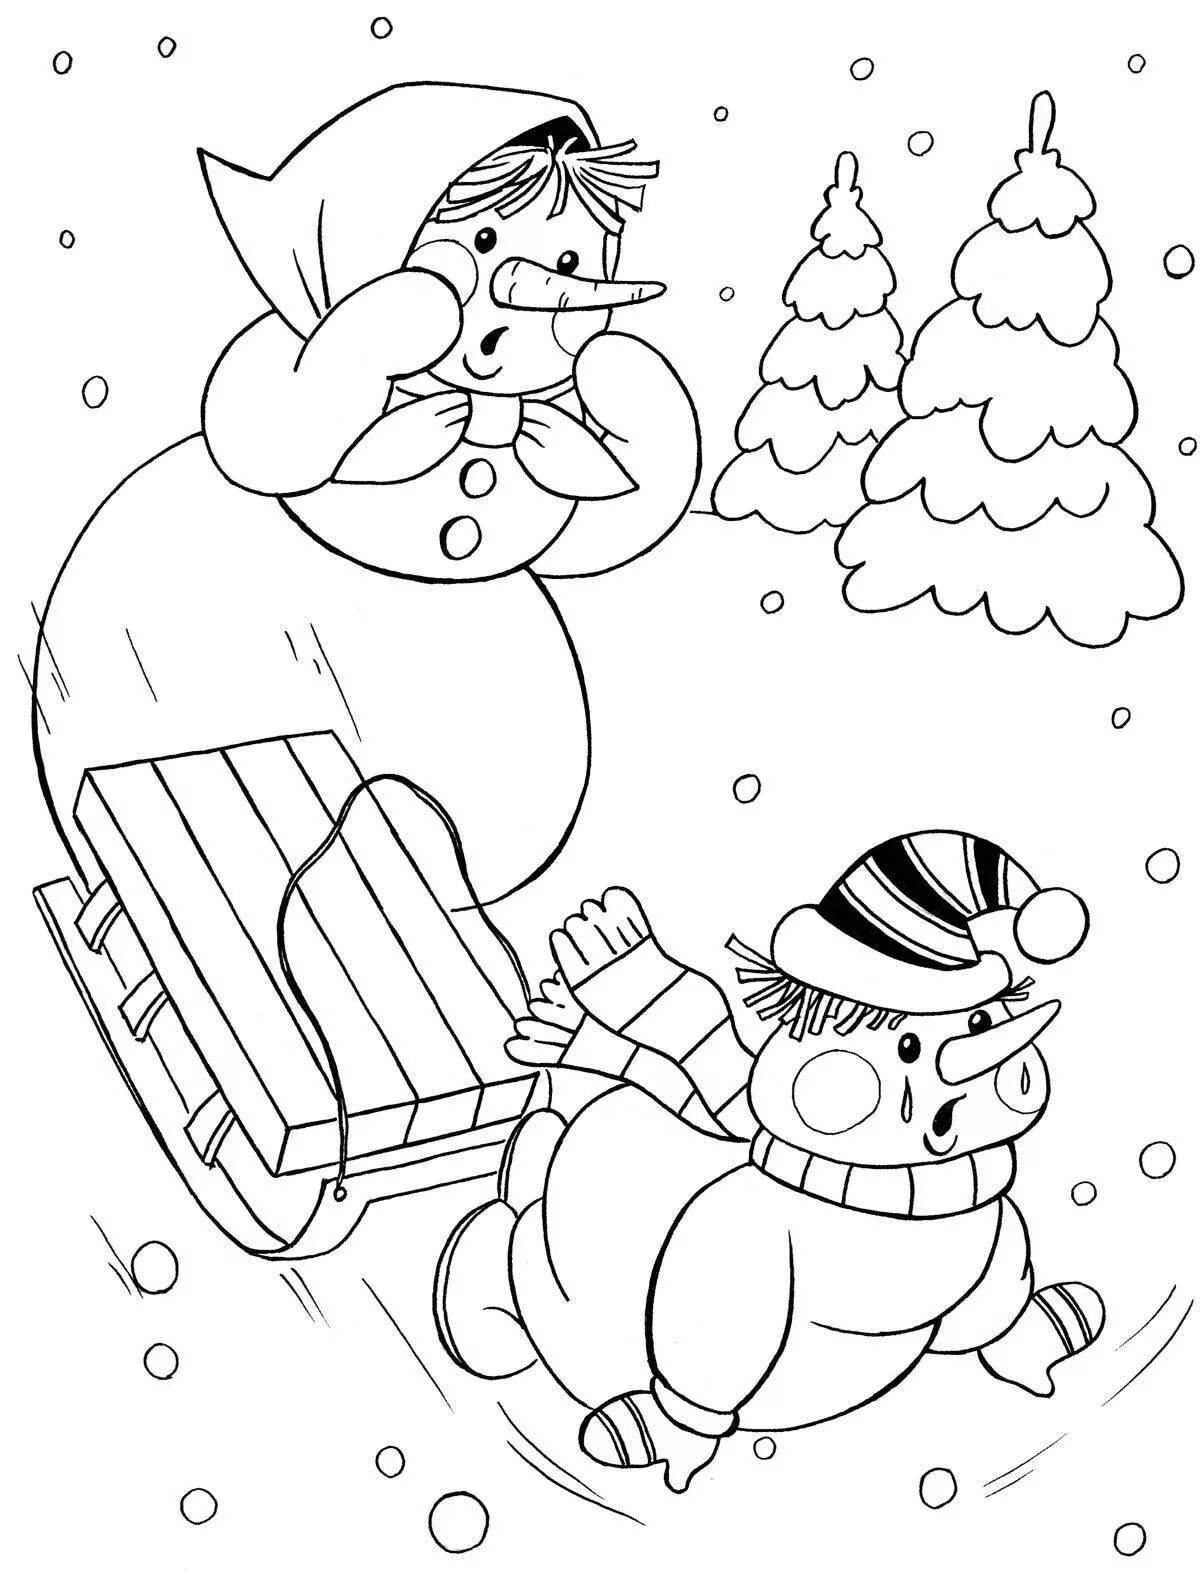 Outgoing Postman Snowman Coloring Page